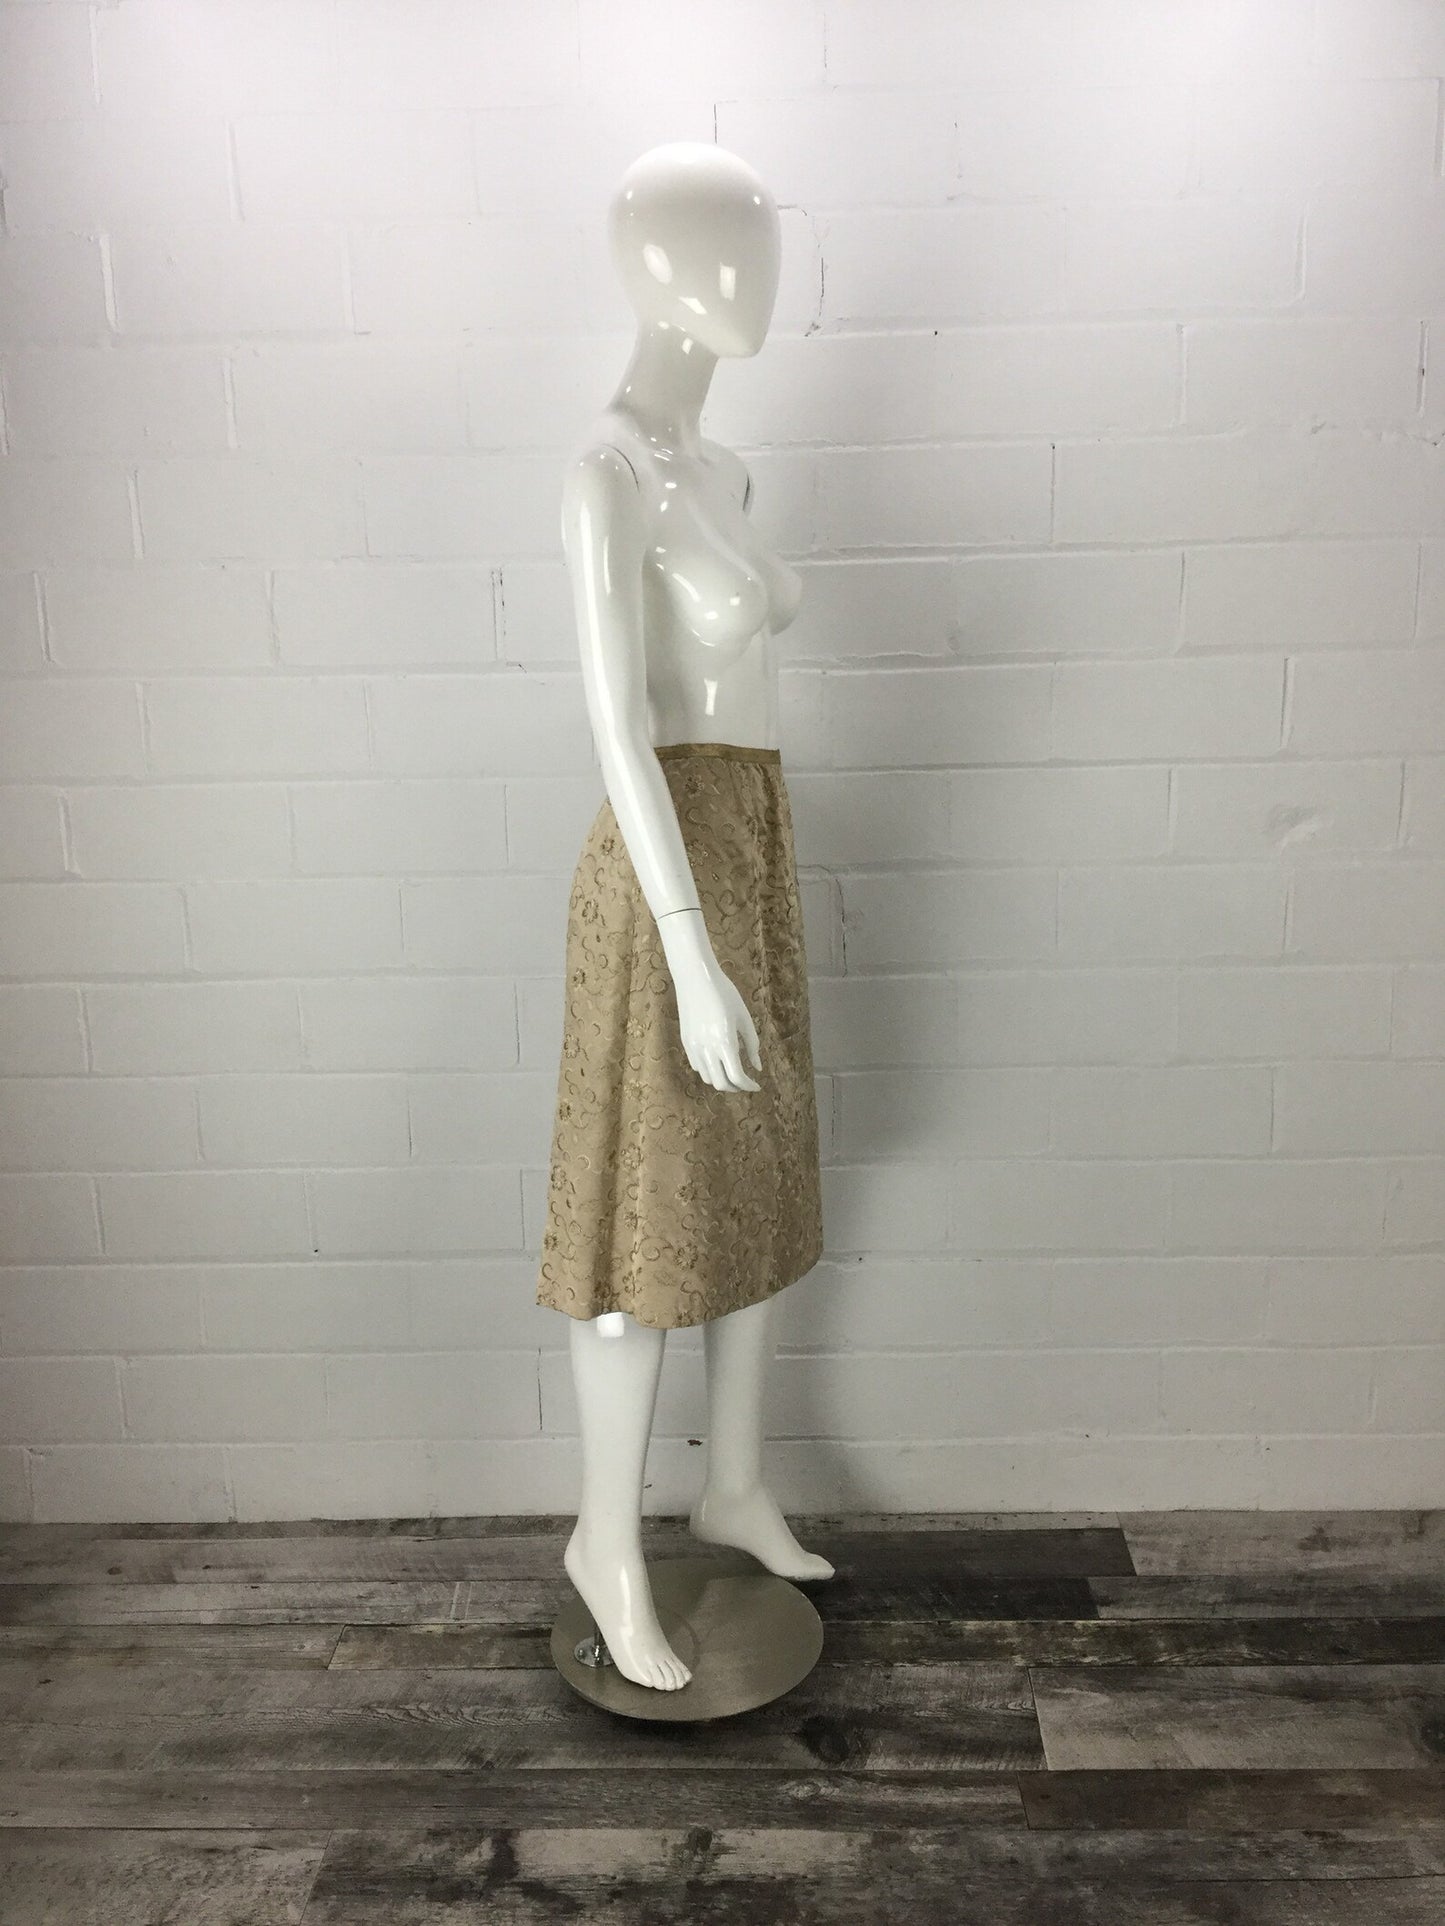 Vintage 60's Champagne Gold Metallic Floral Embroidered Silk Pencil Skirt with Pink Lining, W 24", Swinging 60's Mod Cocktail Party